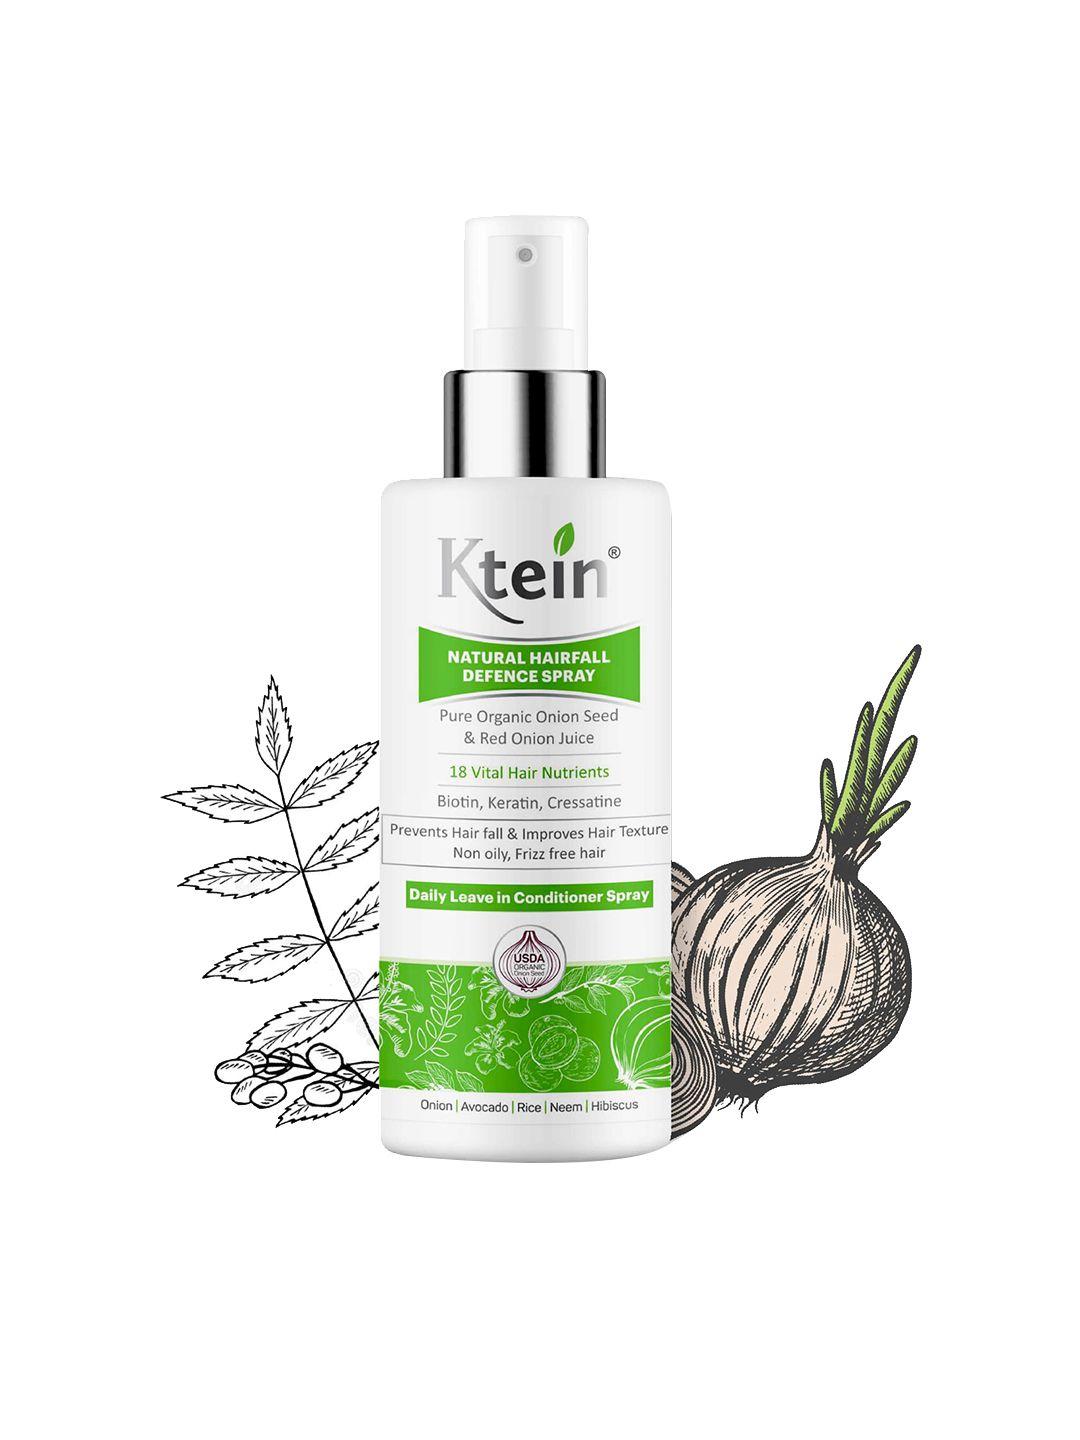 ktein natural hairfall defence spray with pure organic onion seed & red onion juice- 100ml